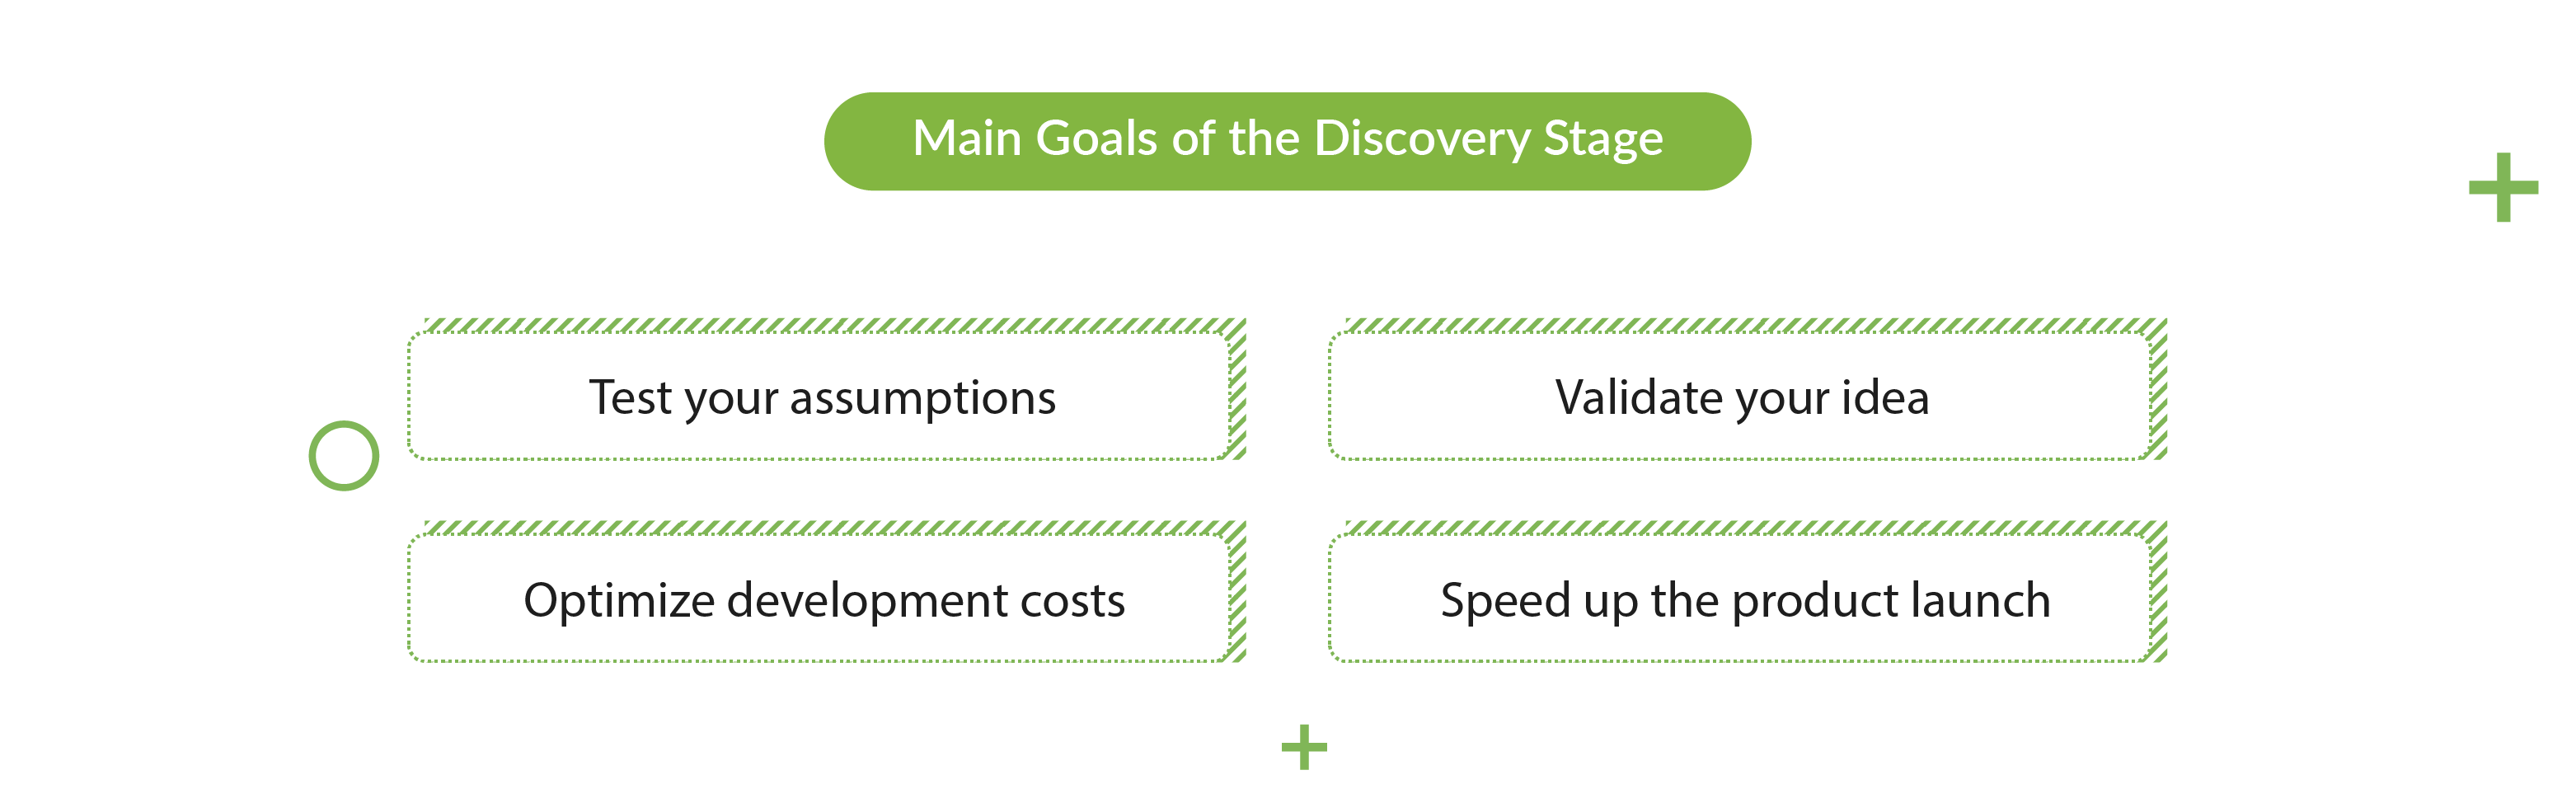 Goals of the Discovery Stage